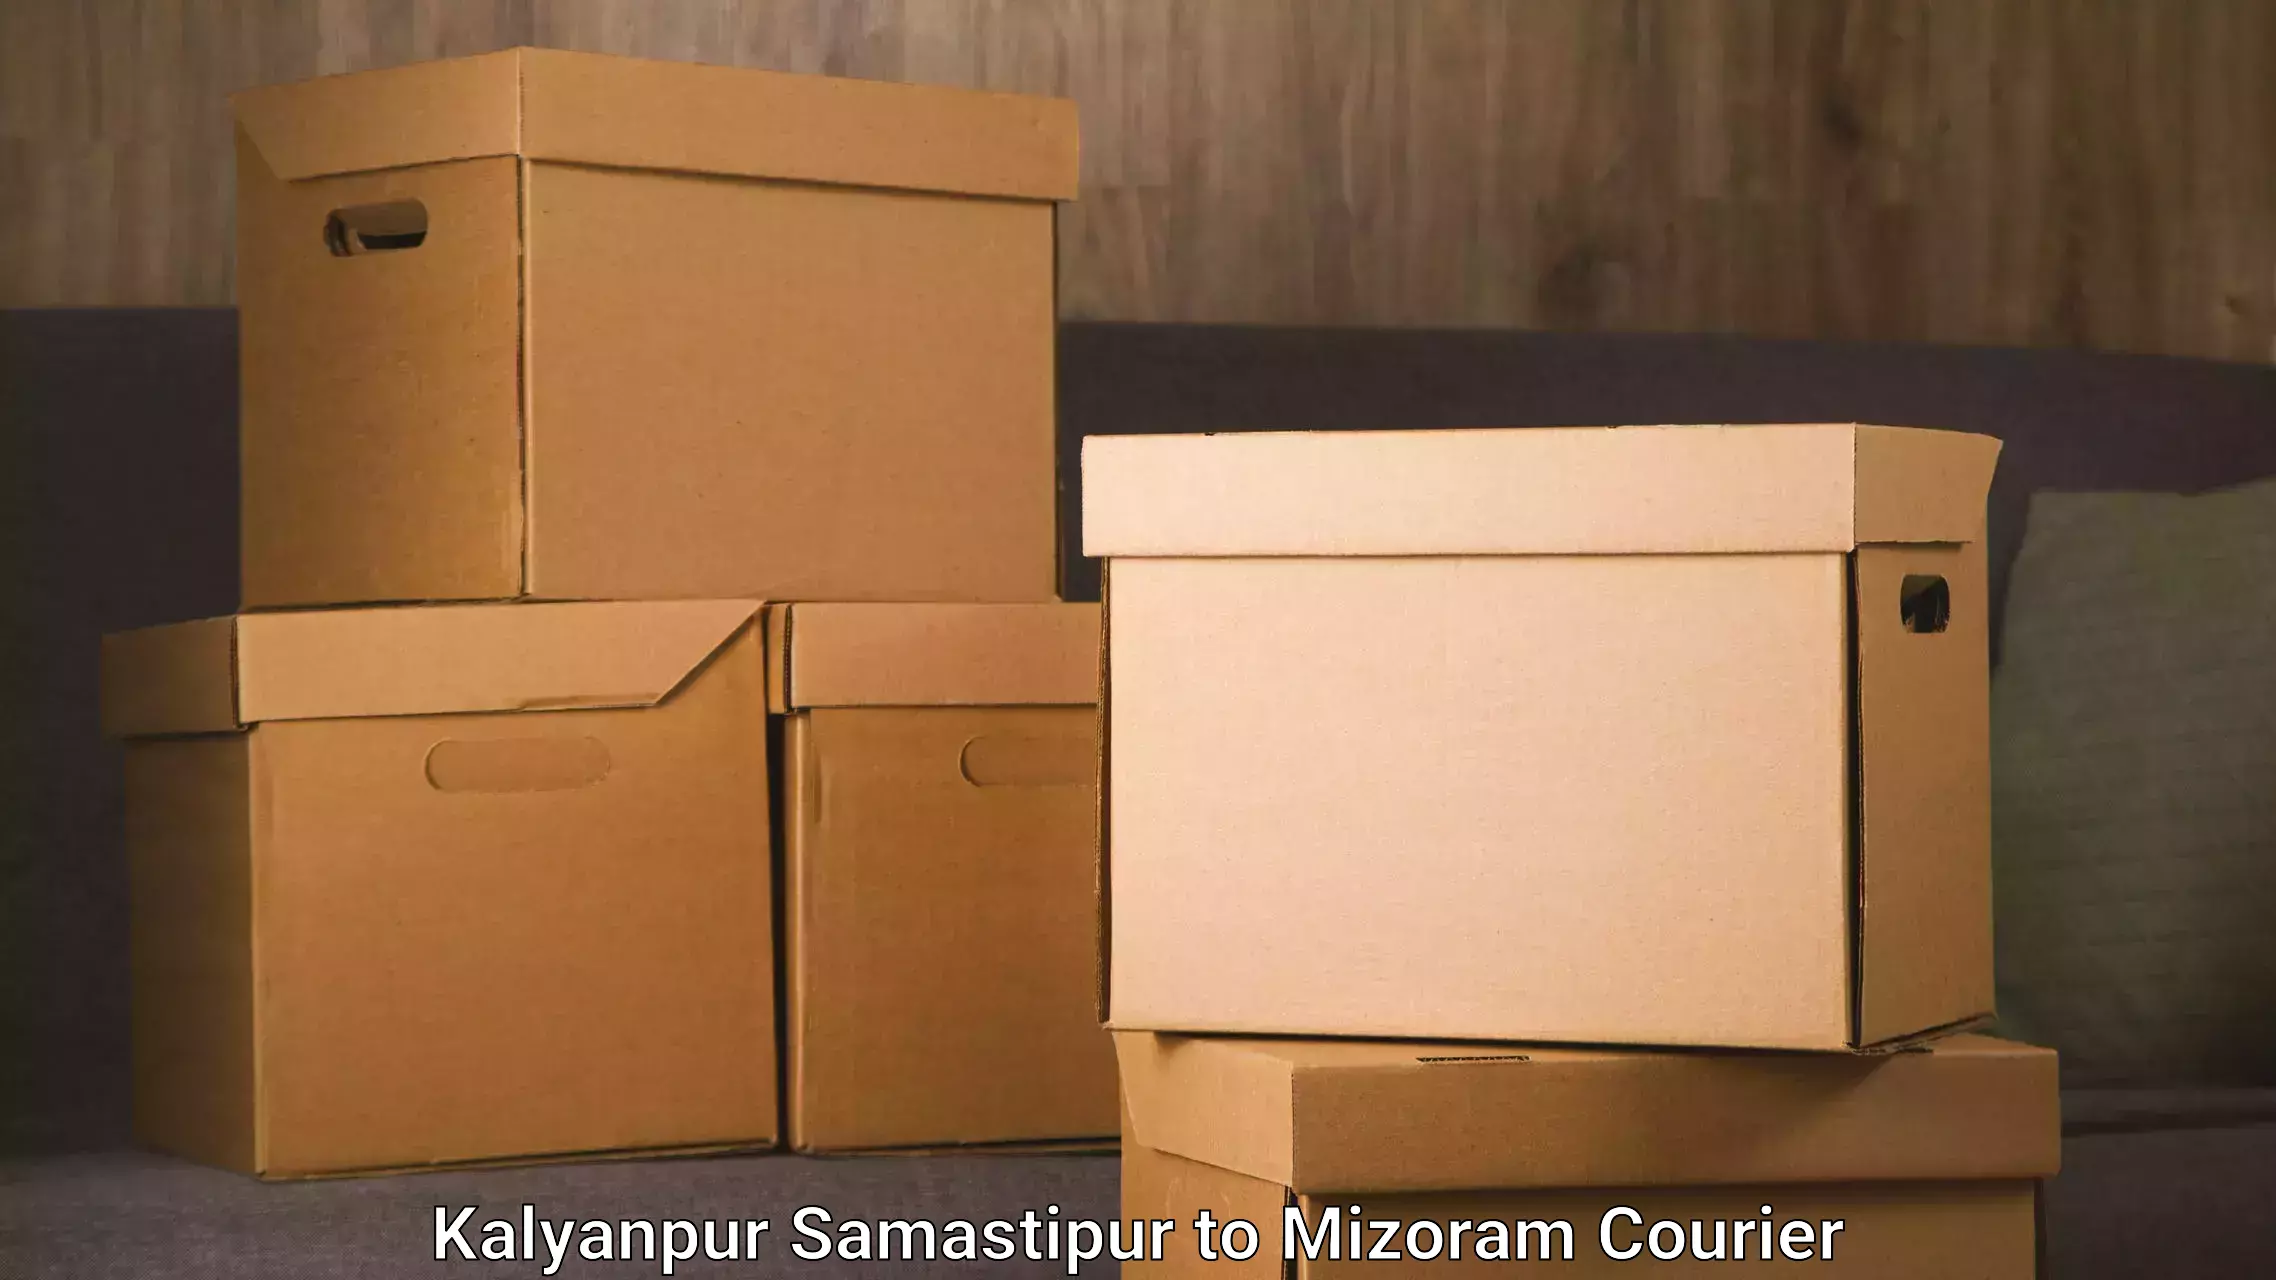 Furniture delivery service Kalyanpur Samastipur to Hnahthial